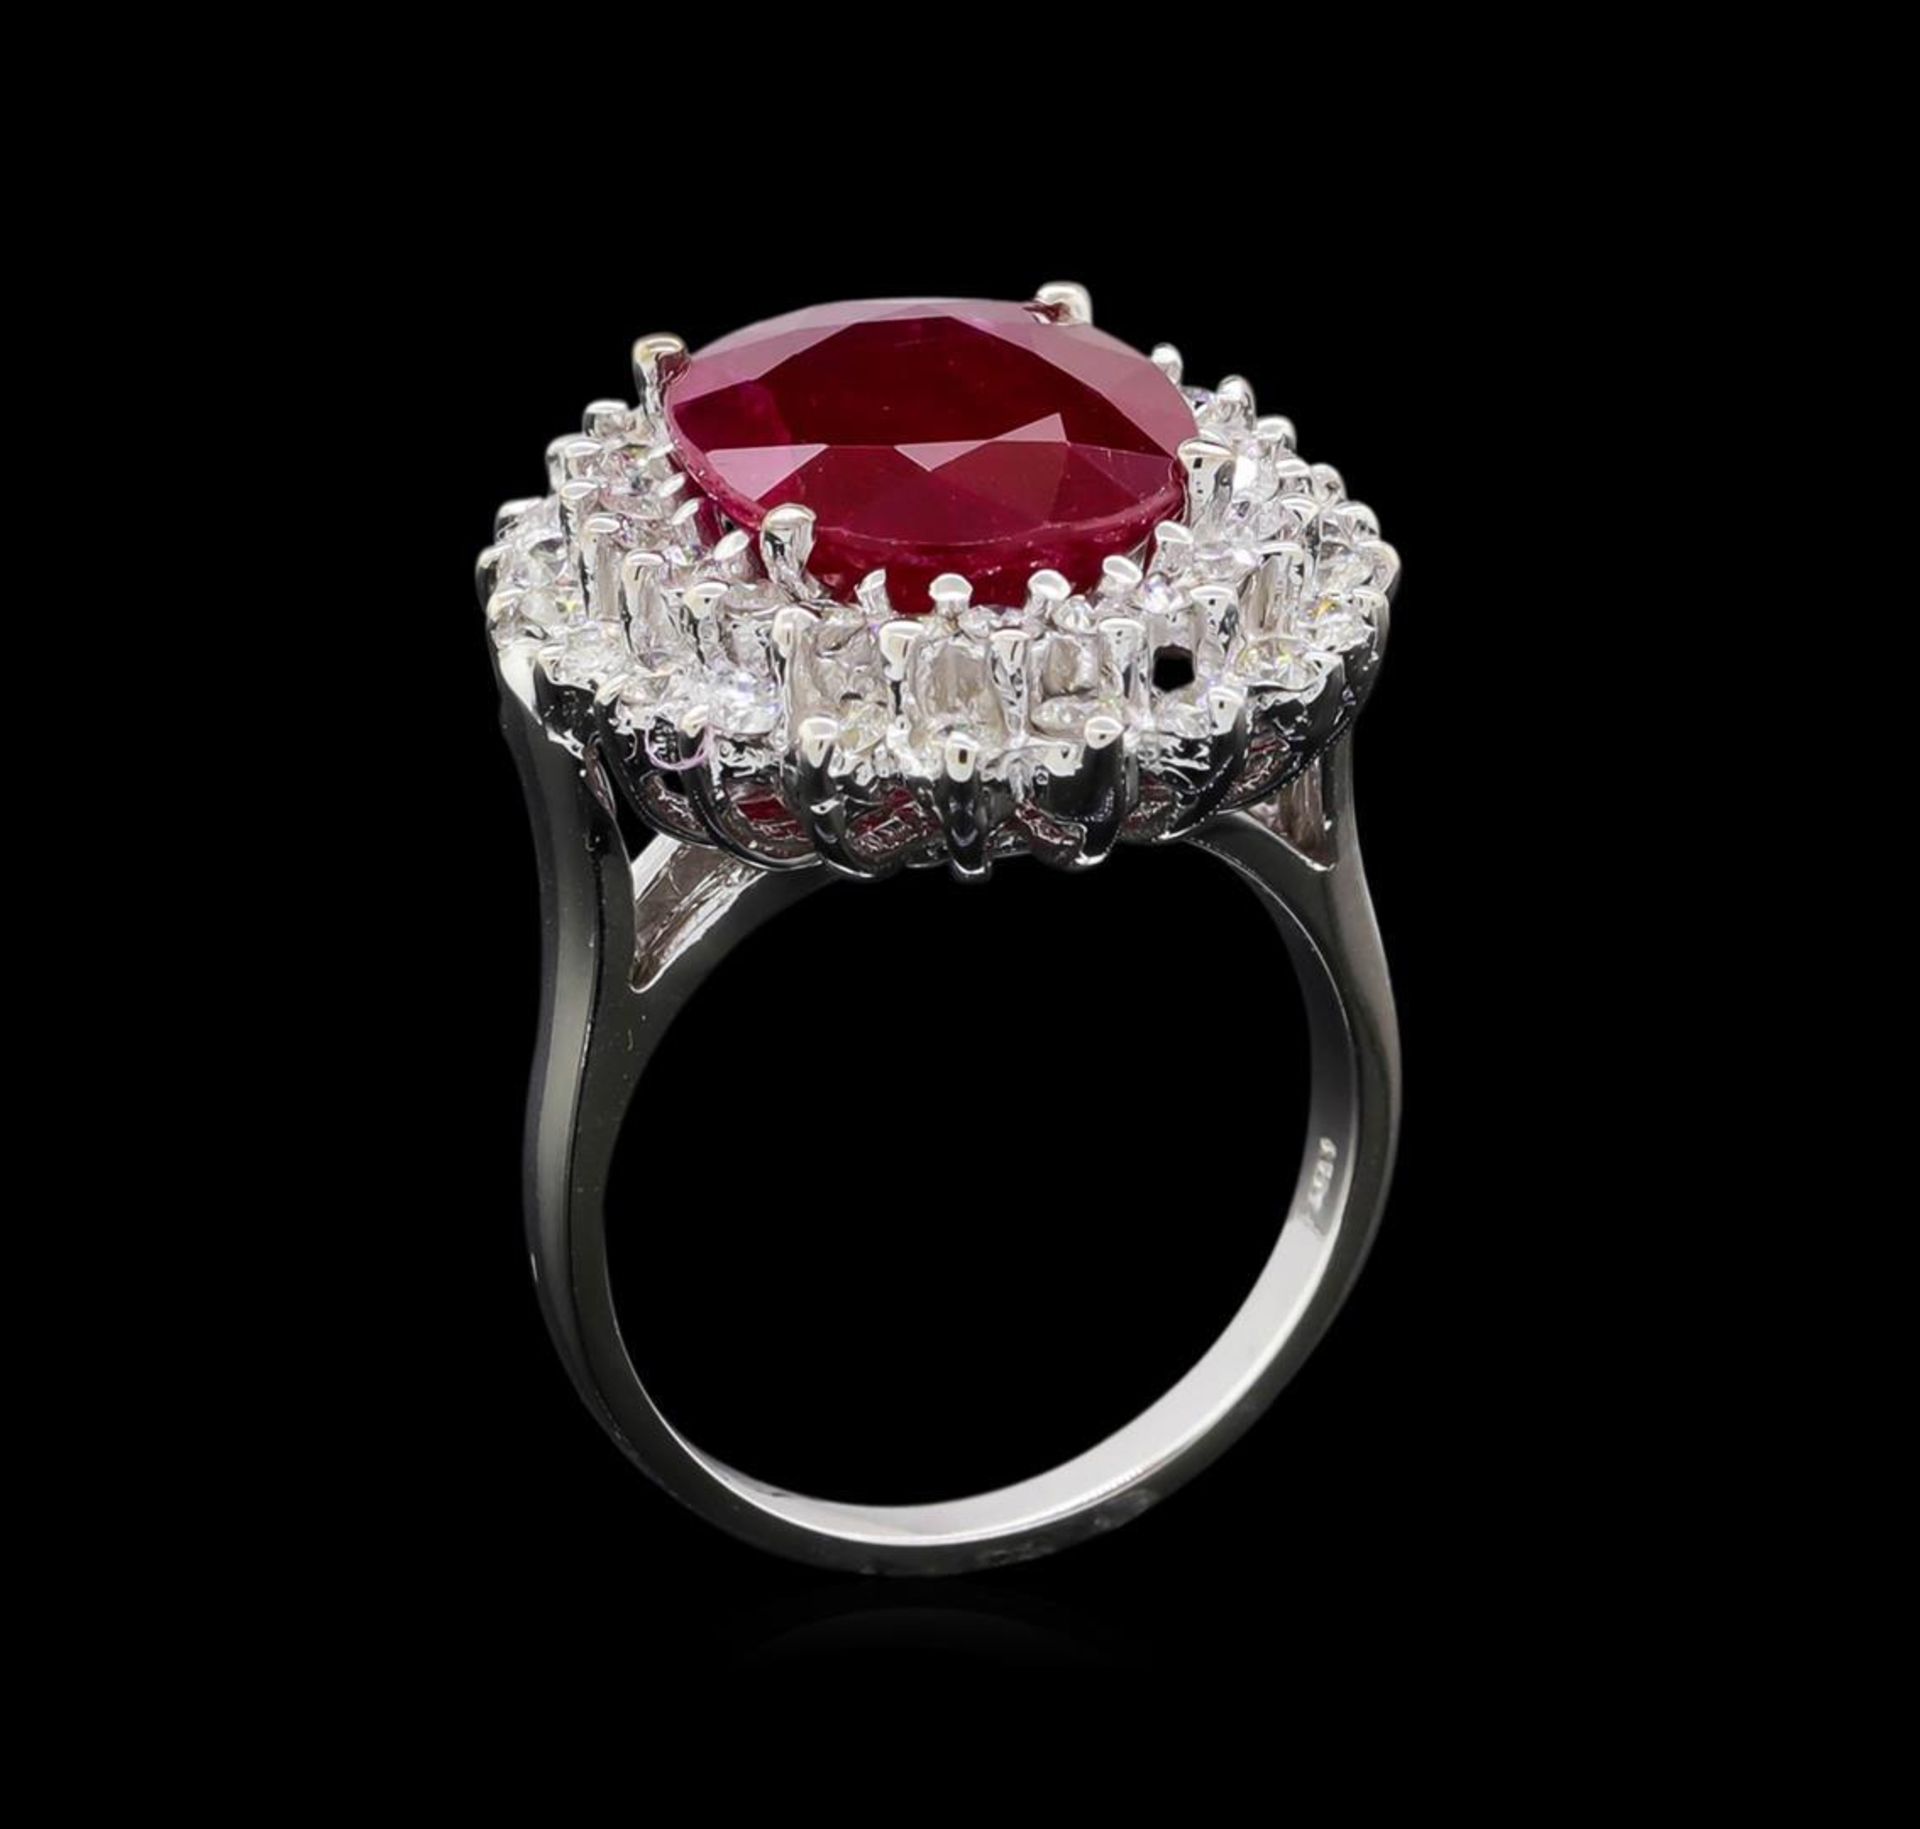 GIA Cert 6.53 ctw Ruby and Diamond Ring - 14KT White Gold - Image 4 of 6